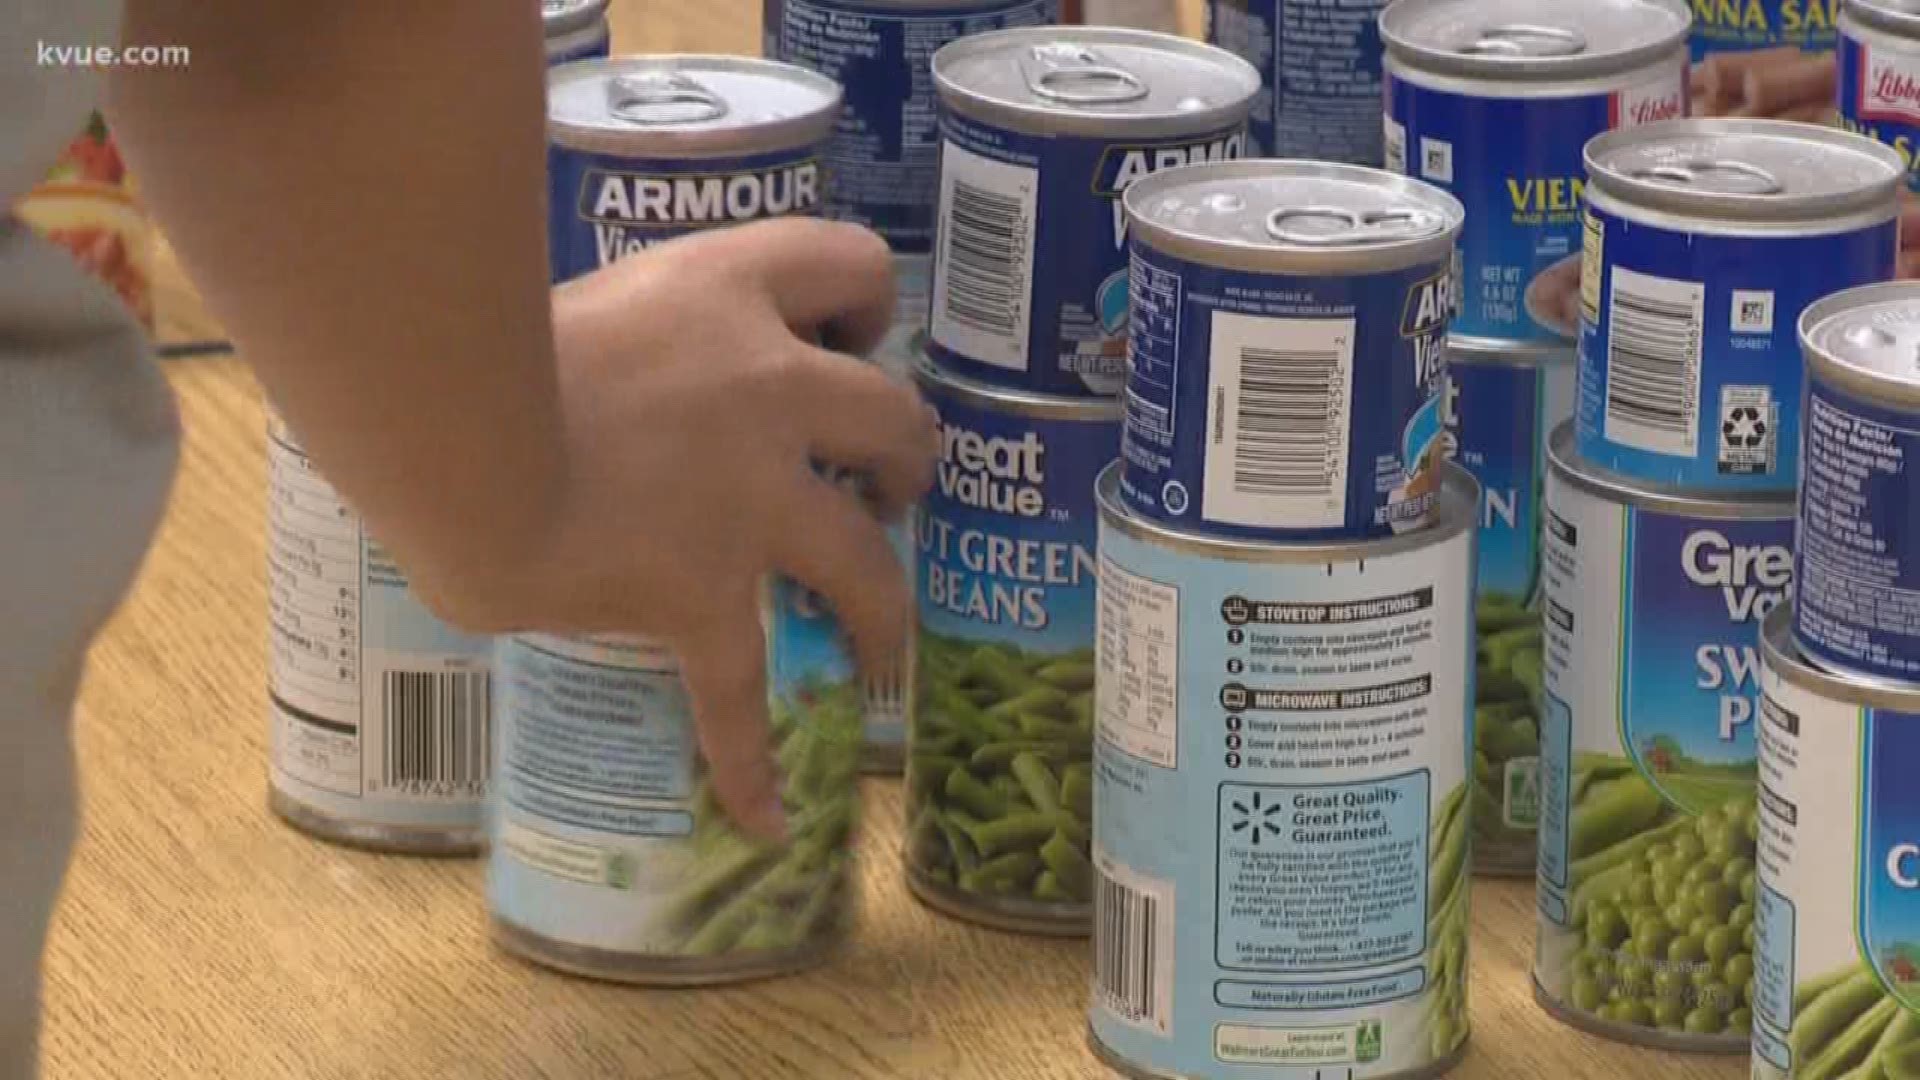 Kids helping kids, that's what's happening at an elementary school in Manor. It's a program where students fill backpacks with food for other students in need.